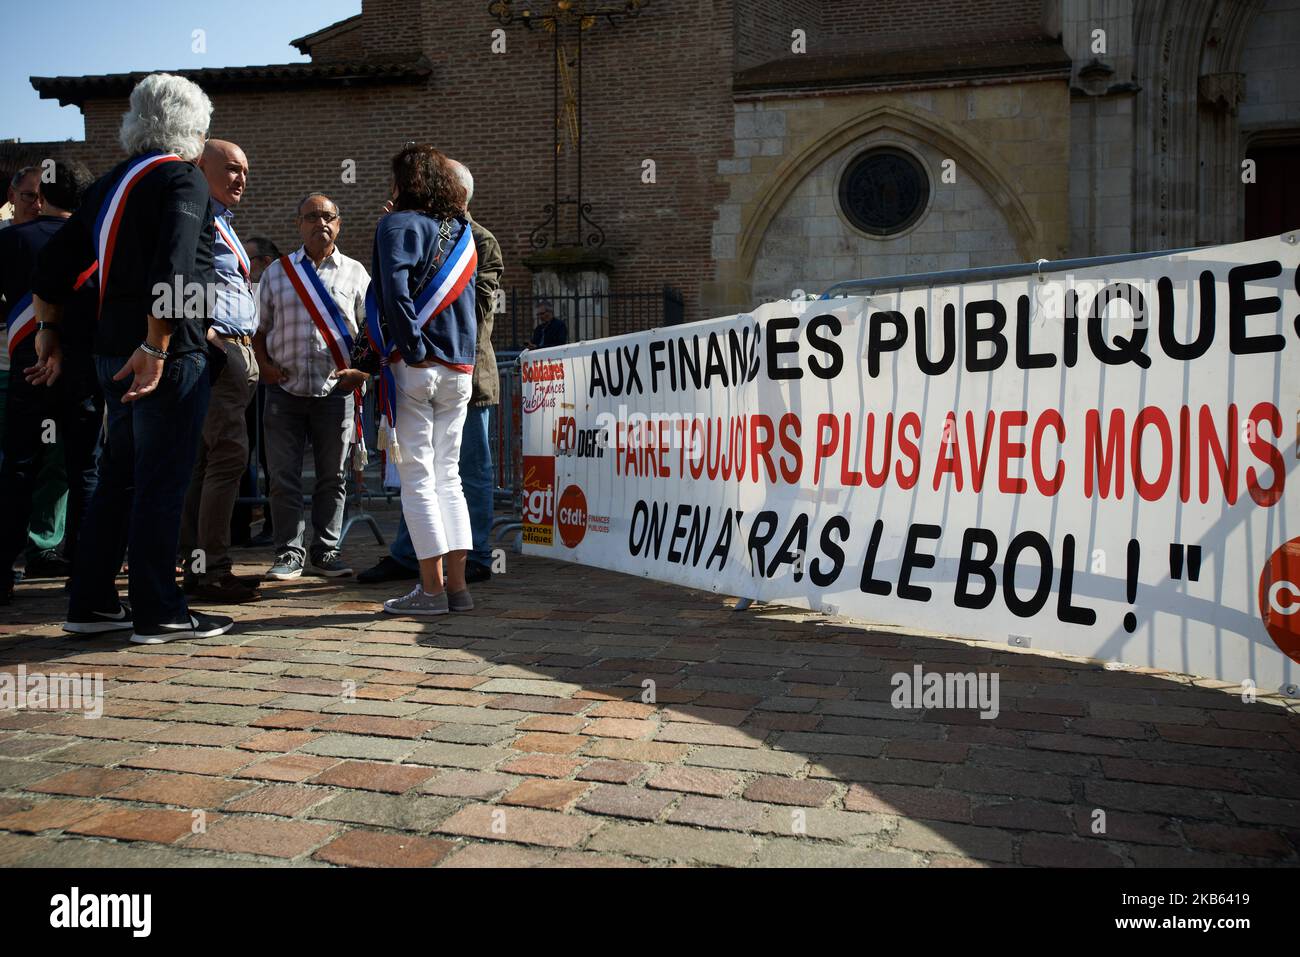 A banner reads 'Public Finance, doing more with less, we're fed up with this'. Civil servants from the DGFIP (General Directorate of Public Finance) and mayors gathered in front of the Prefecture of Haute-Garonne to protest against the Darmanin's plan to close down tax offices across France. Darmaninis the finance minister. In the Haute-Garonne department, 25 tax offices will be closd and in the Lot-et-Garonne department, for example, all tax offices will be closed before 2023. Toulouse. France. September 16th 2019. (Photo by Alain Pitton/NurPhoto) Stock Photo